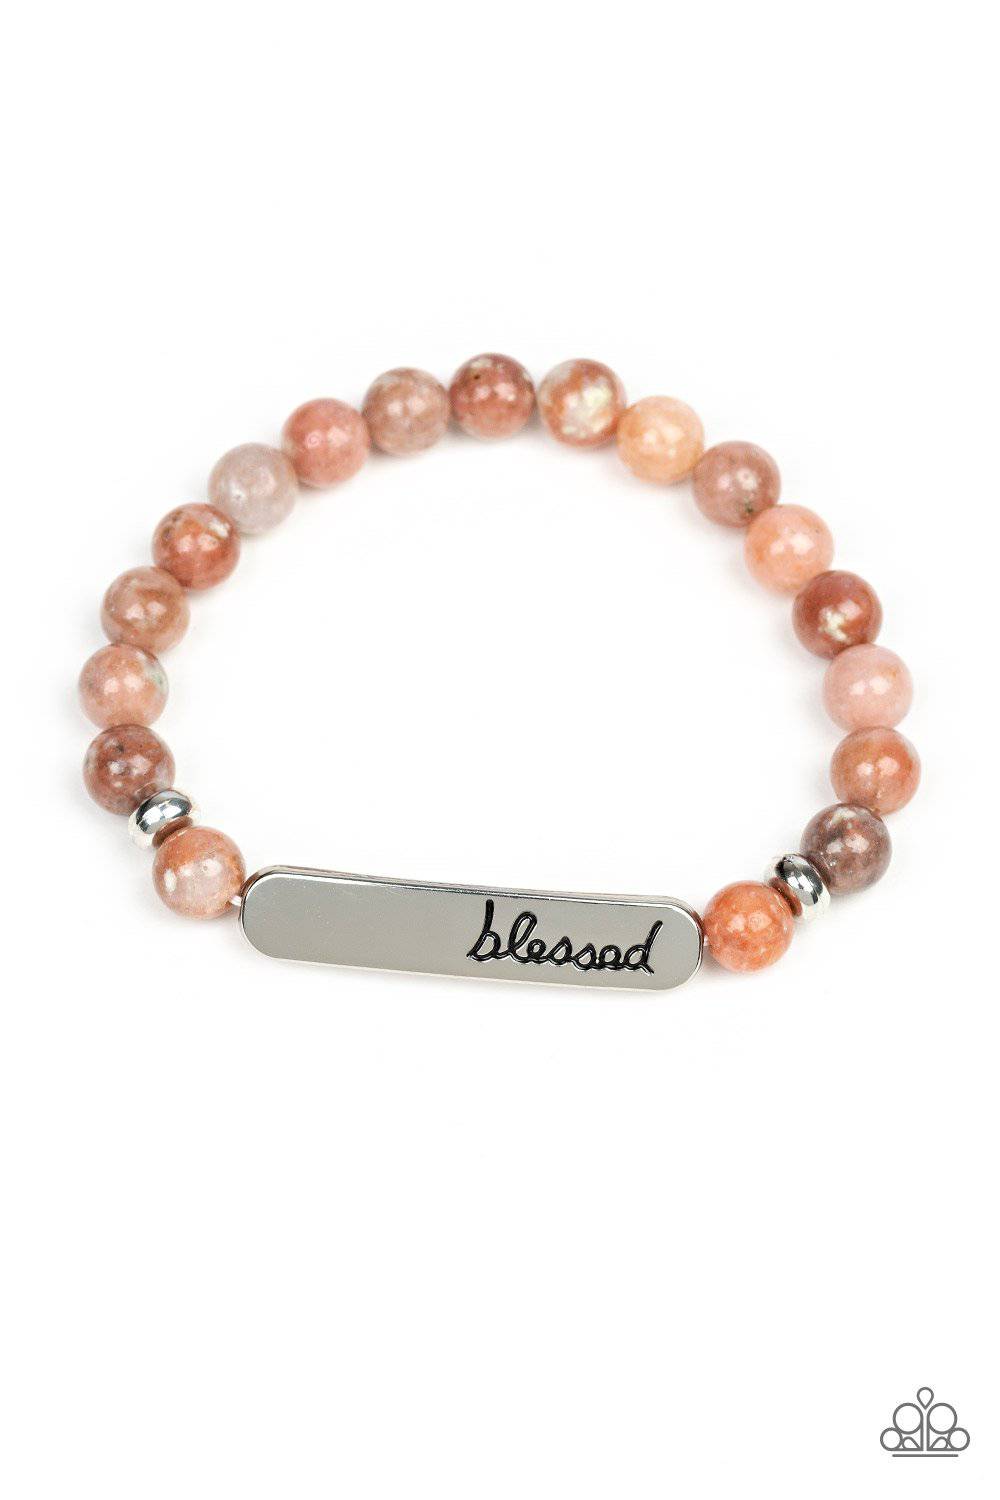 Simply Blessed - Multi - GlaMarous Titi Jewels